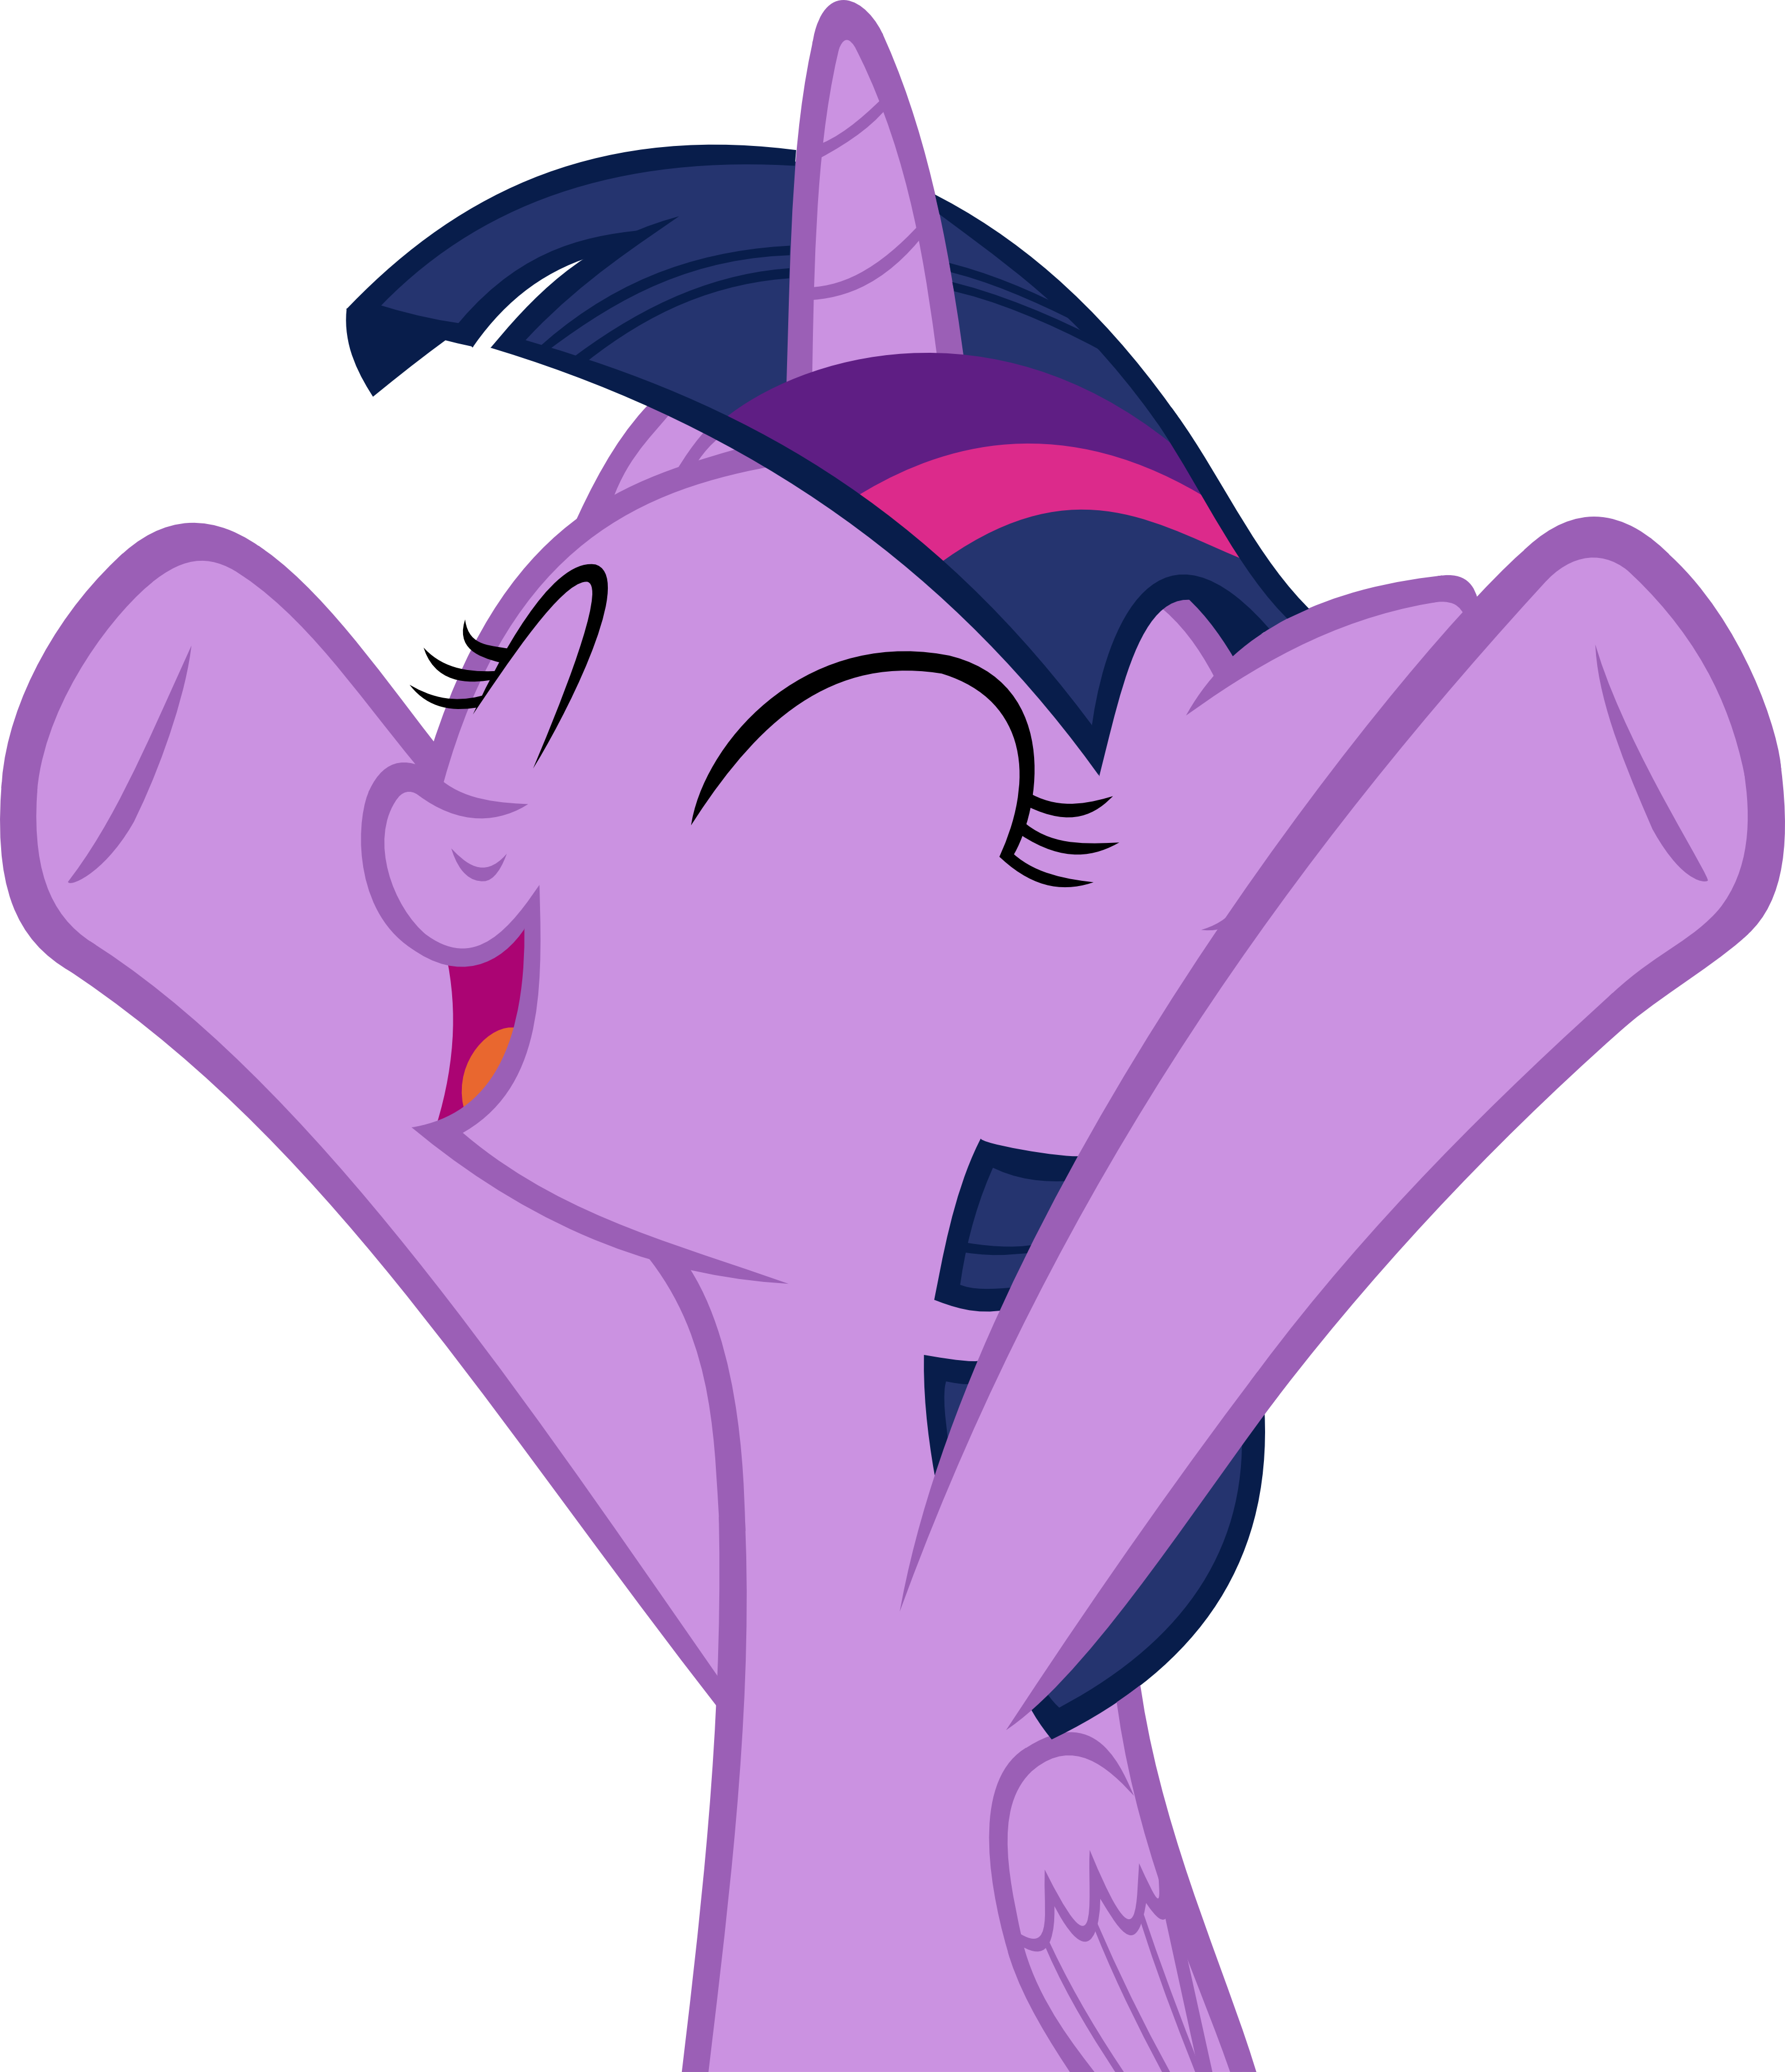 happy_twilight_by_ironm17-dazvy2t.png